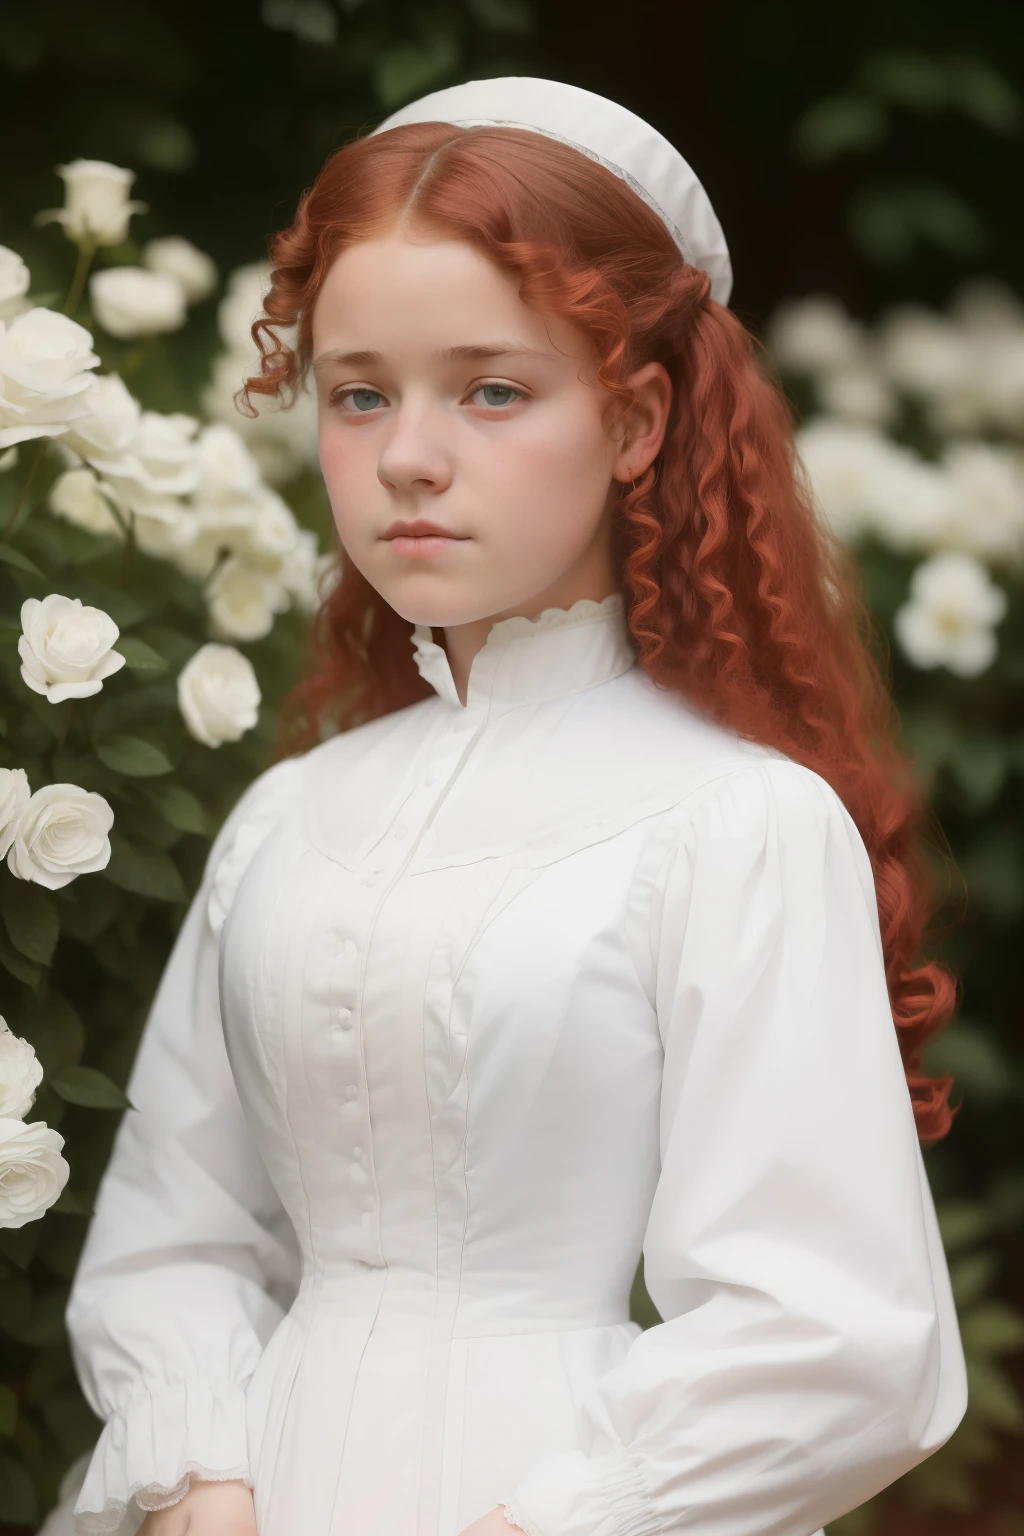 London, 1895. A ((((15-year-old)) Gemma Doyle)), in the gardens of a boarding school for ladies. ((((white from the 19th century)))), ((wild curly red hairstyle from the 10s))